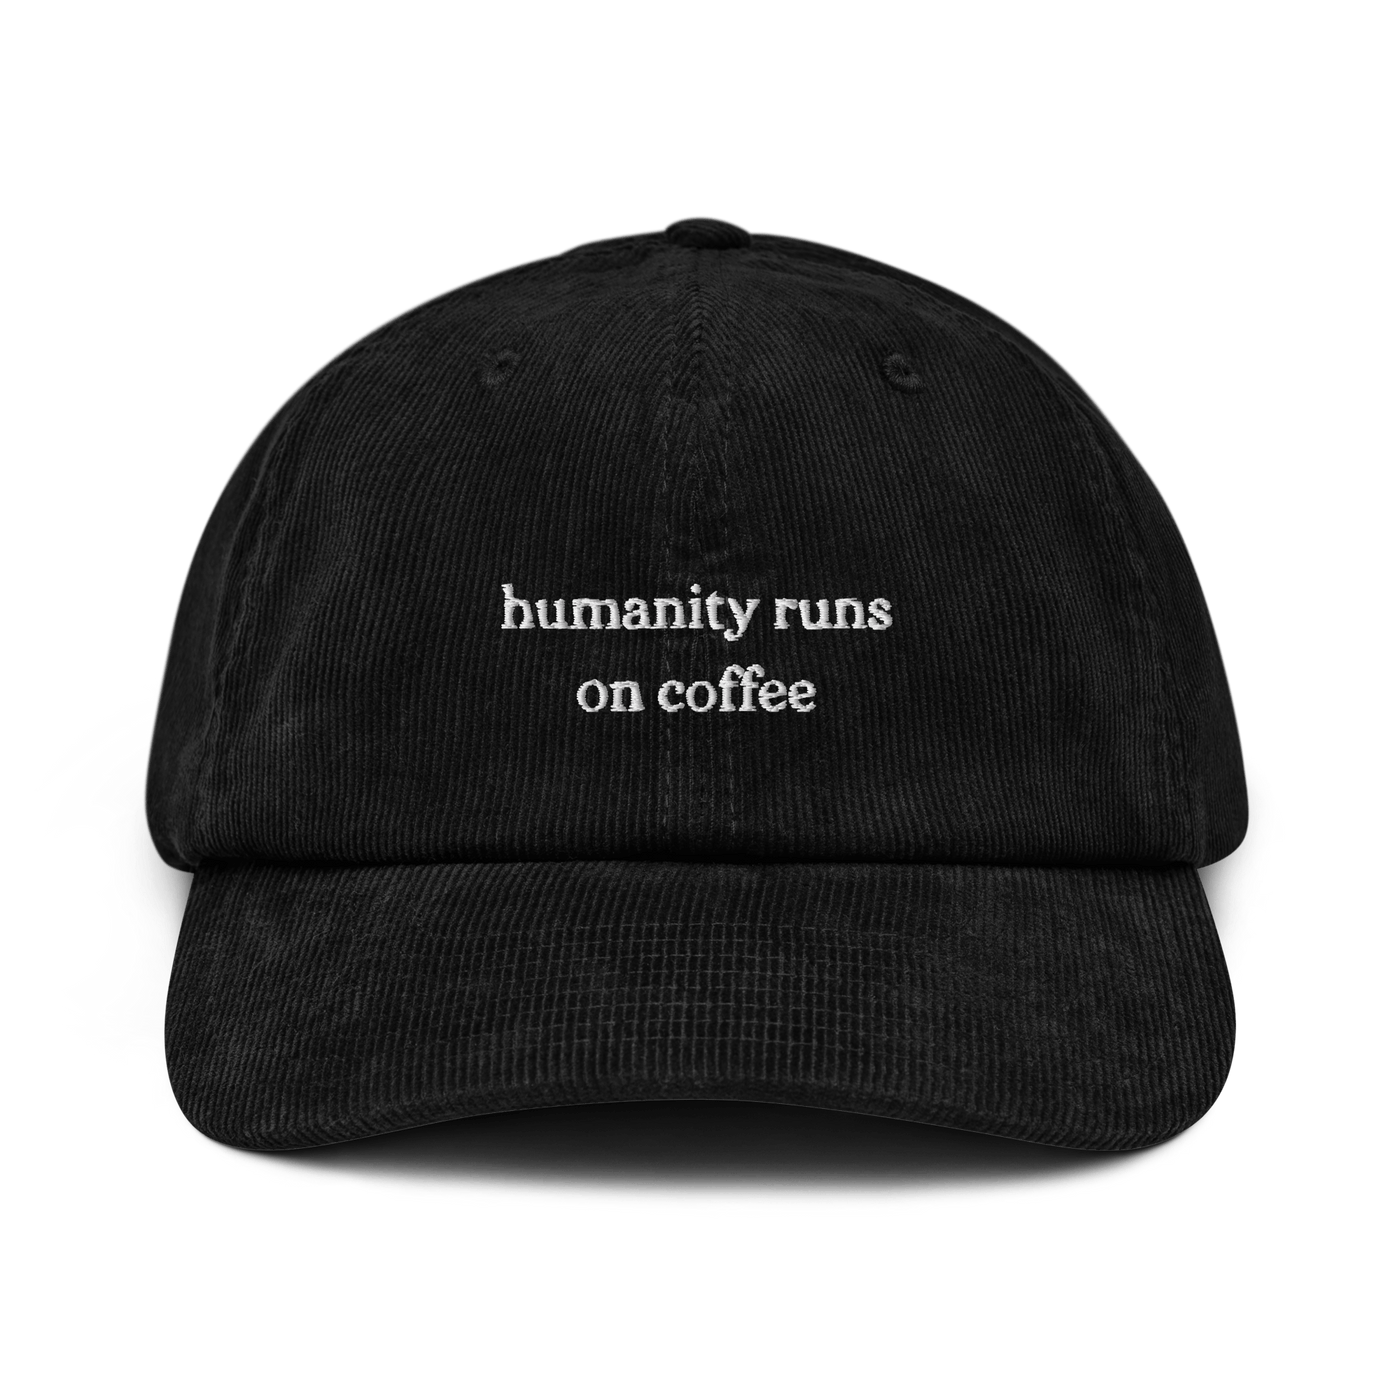 Humanity Runs on Coffee Corduroy hat - Black - - Just Another Cap Store